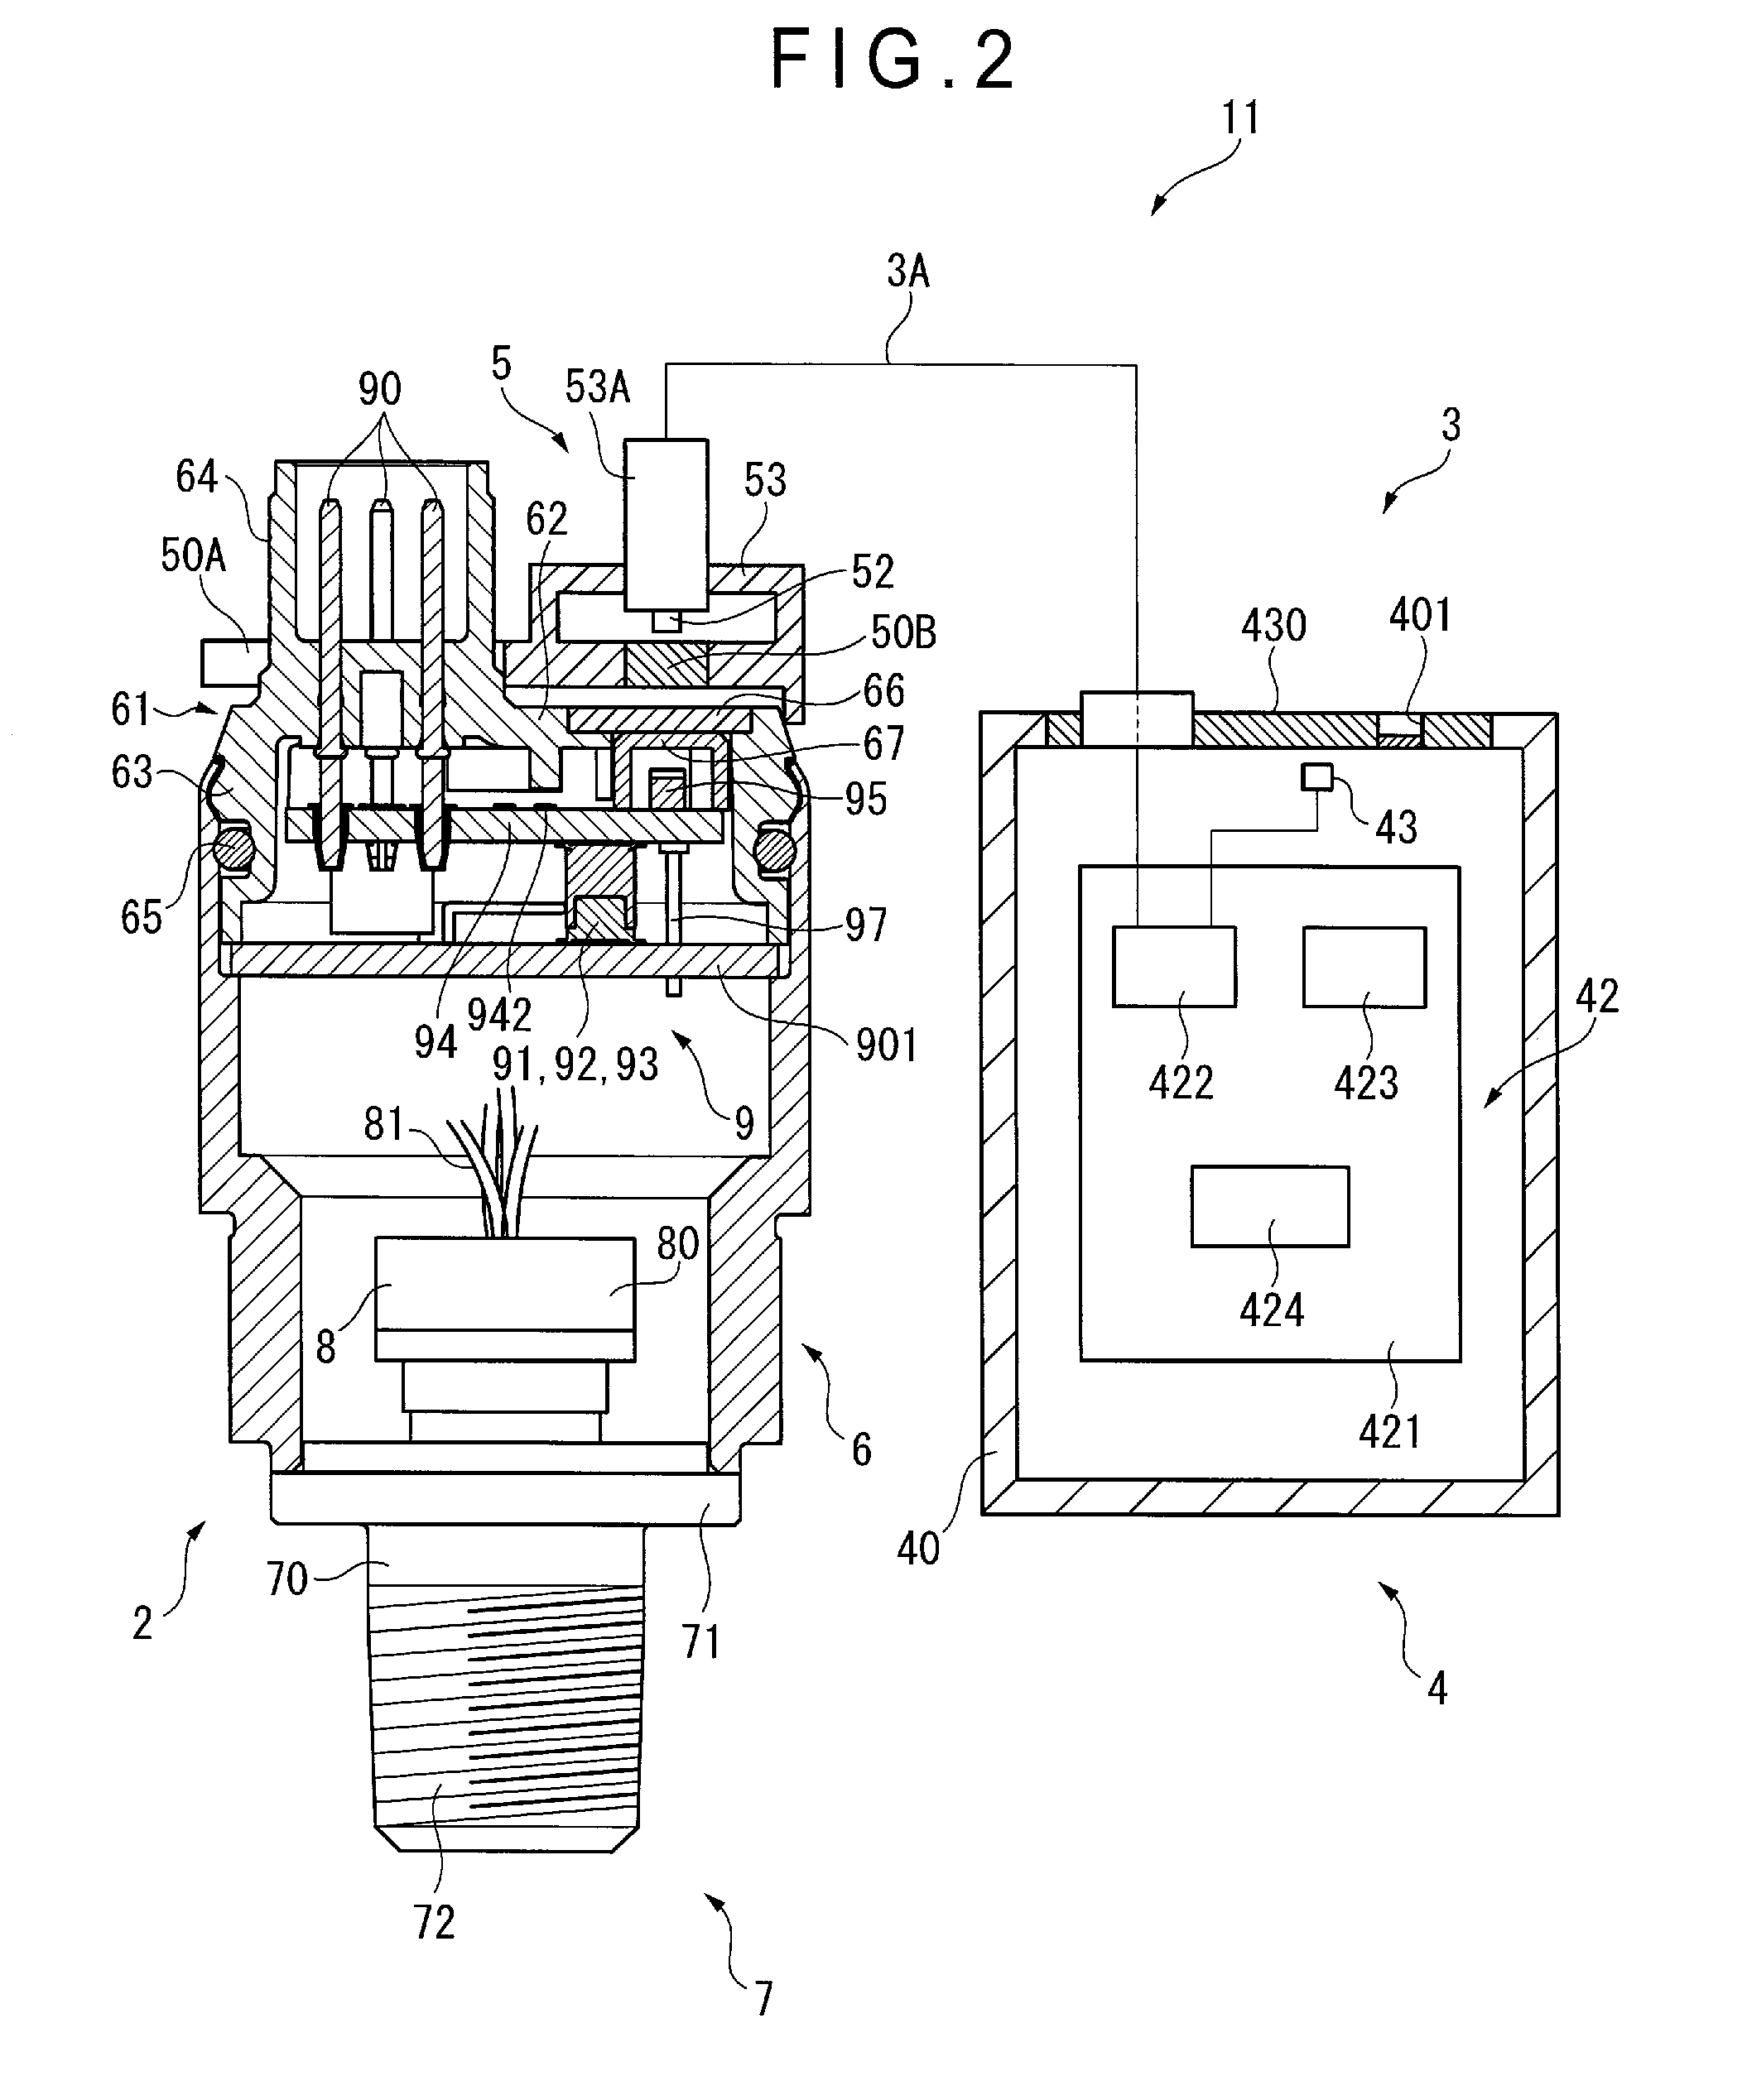 Physical quantity measuring device